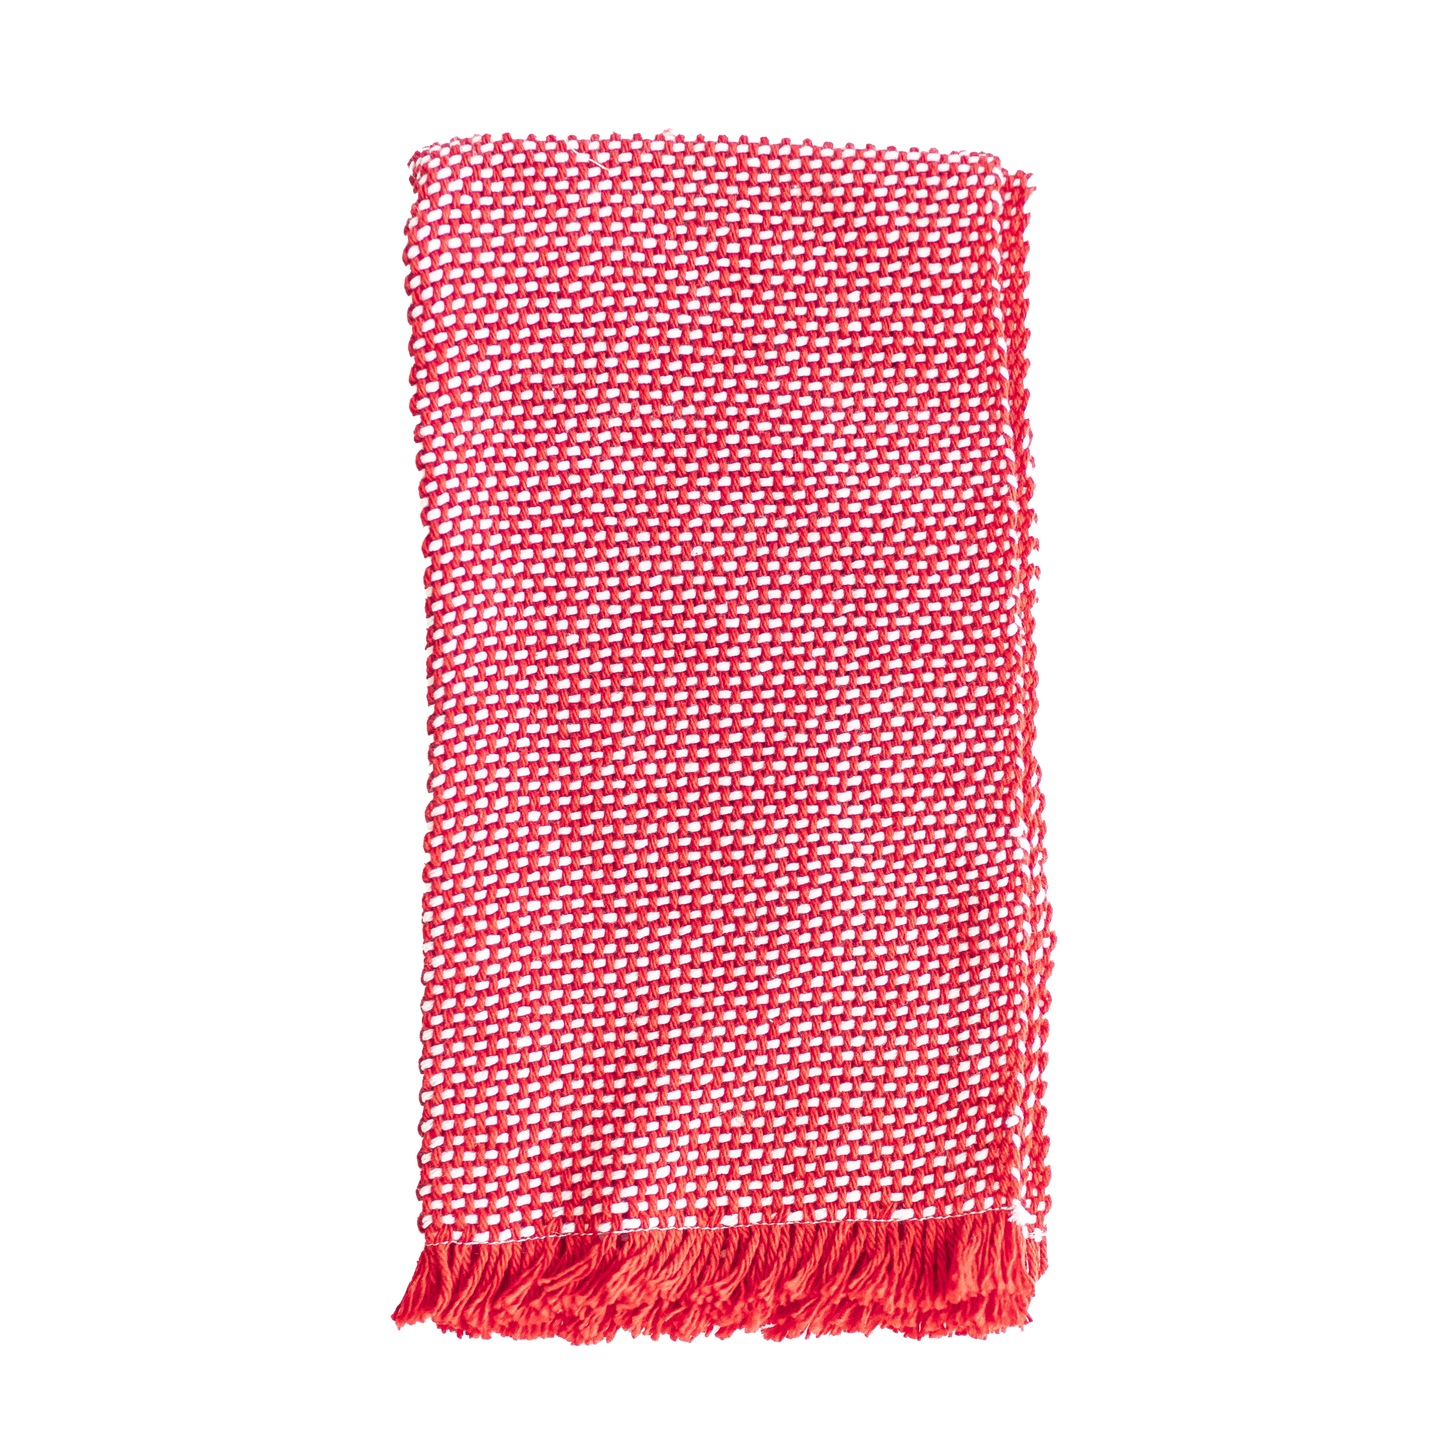 Folded red and white hand towel